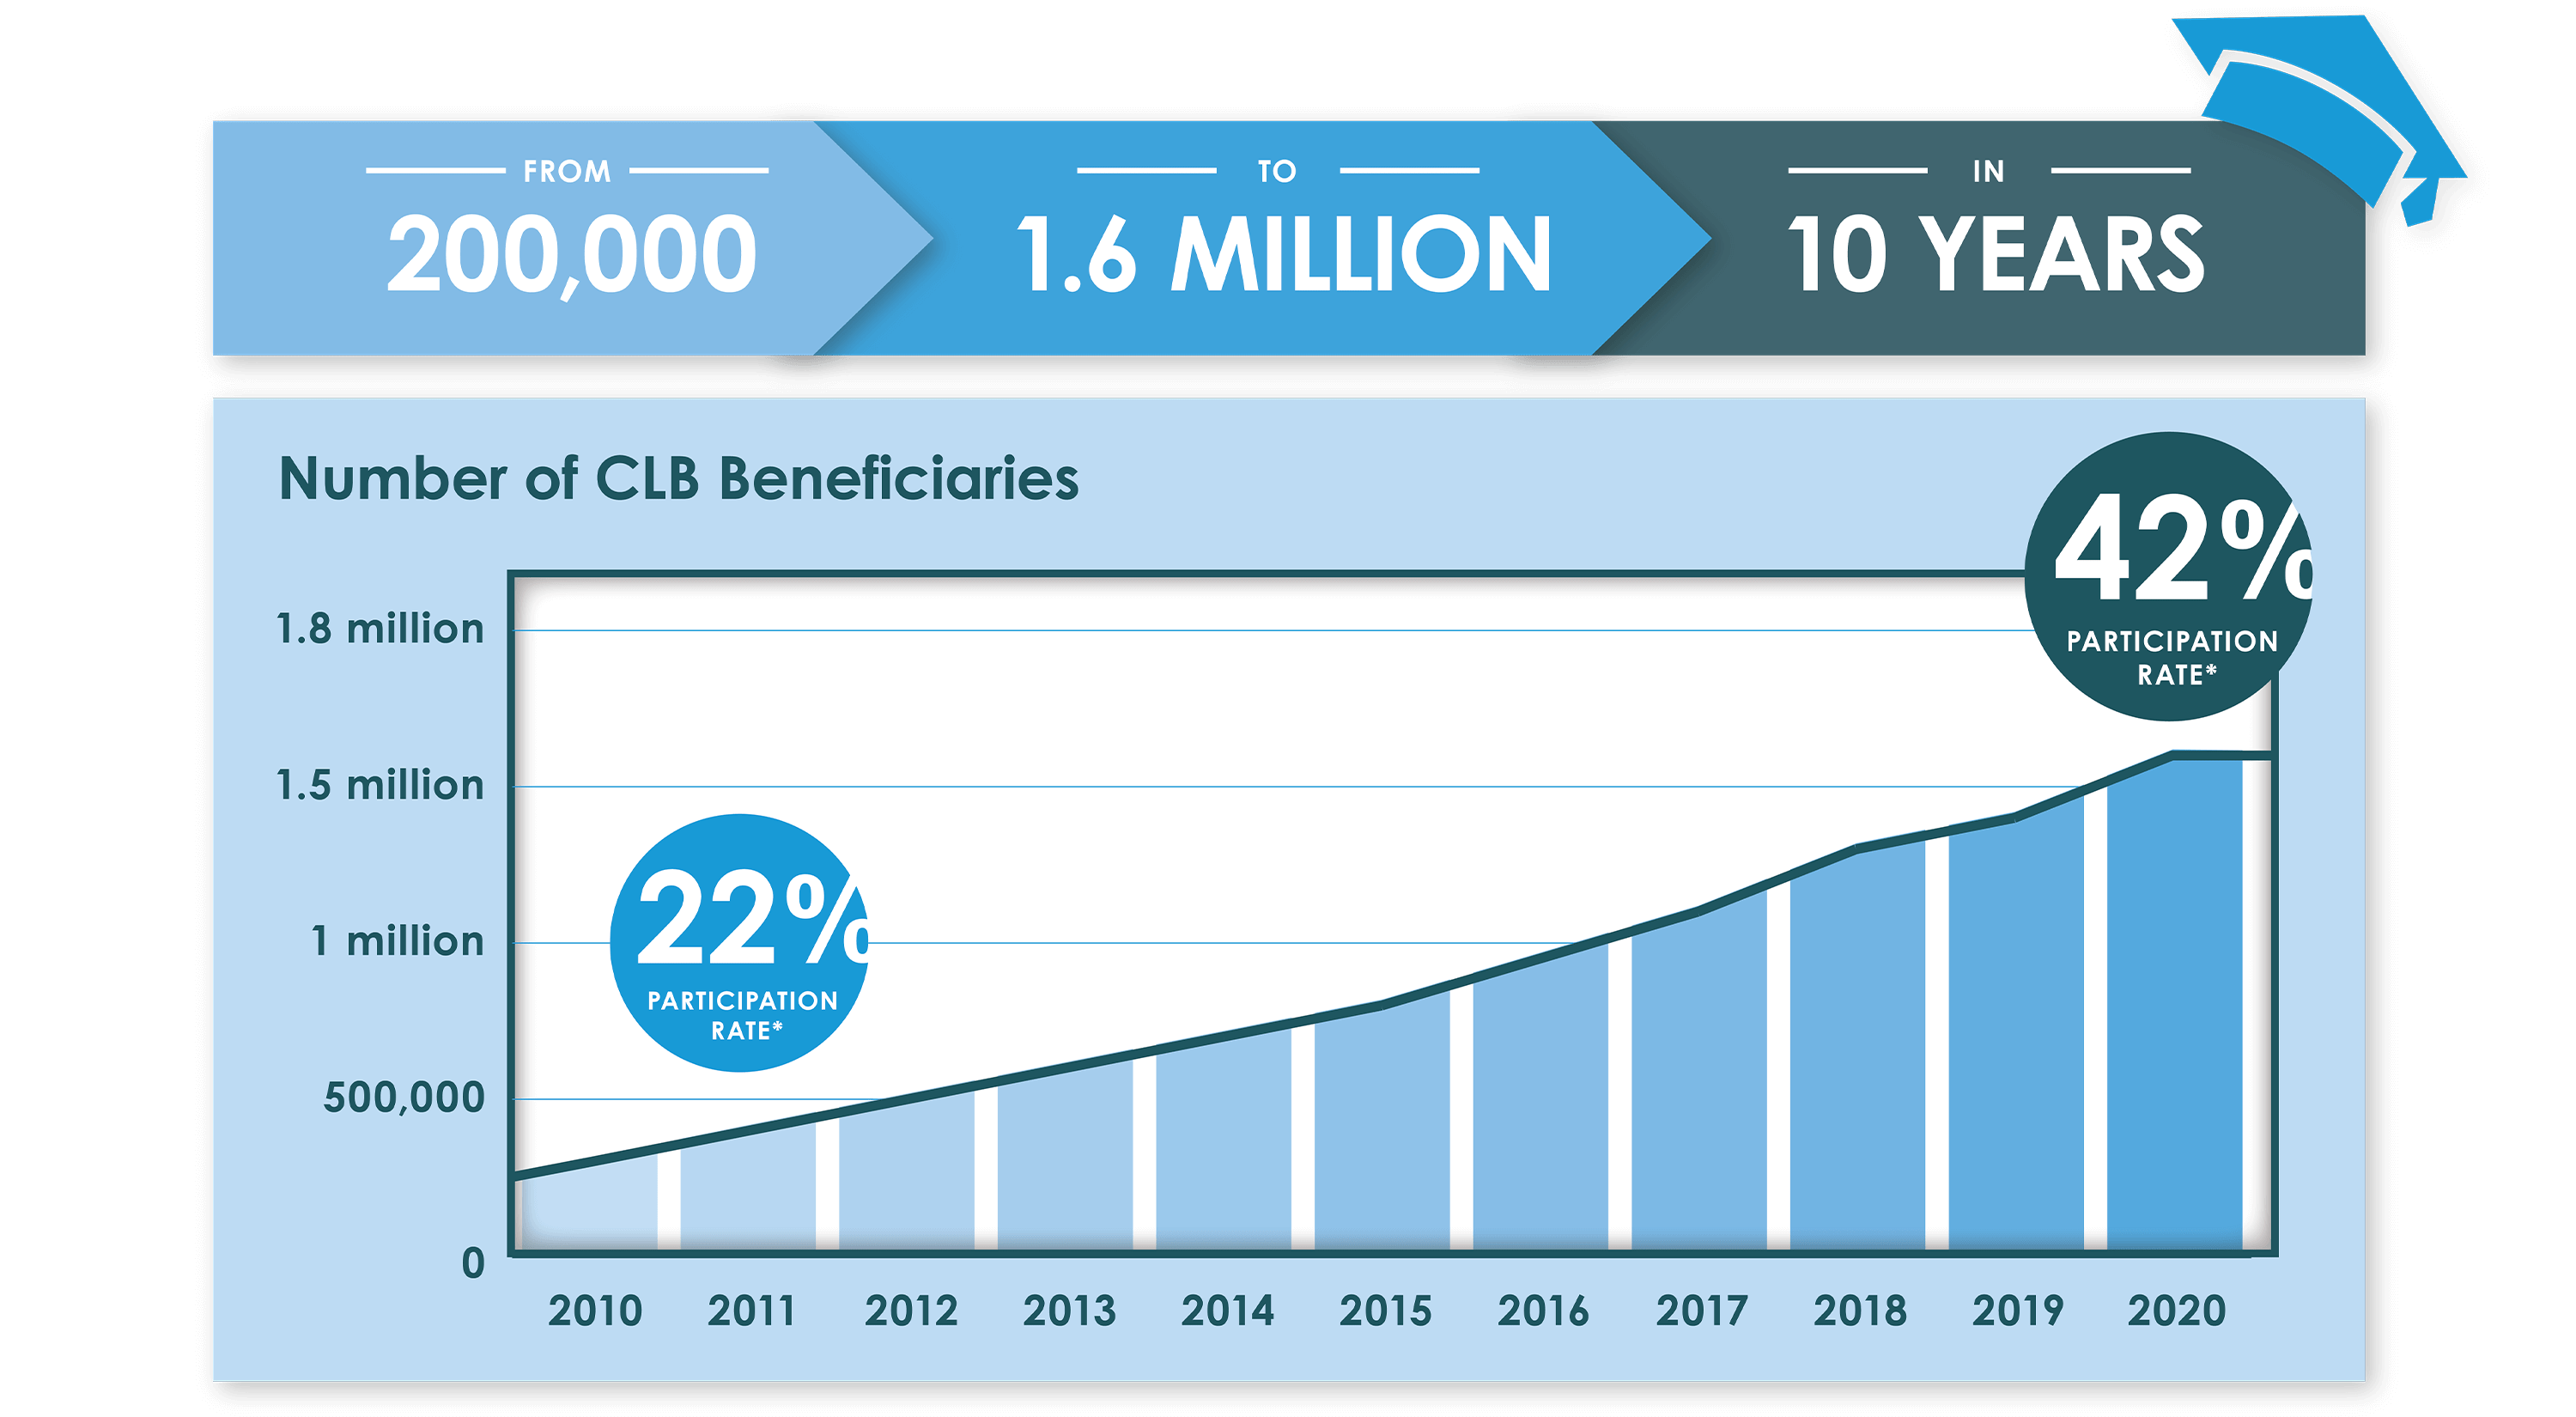 Number of CLB Beneficiaries: from 200,000 to 1.6 million in 10 years!